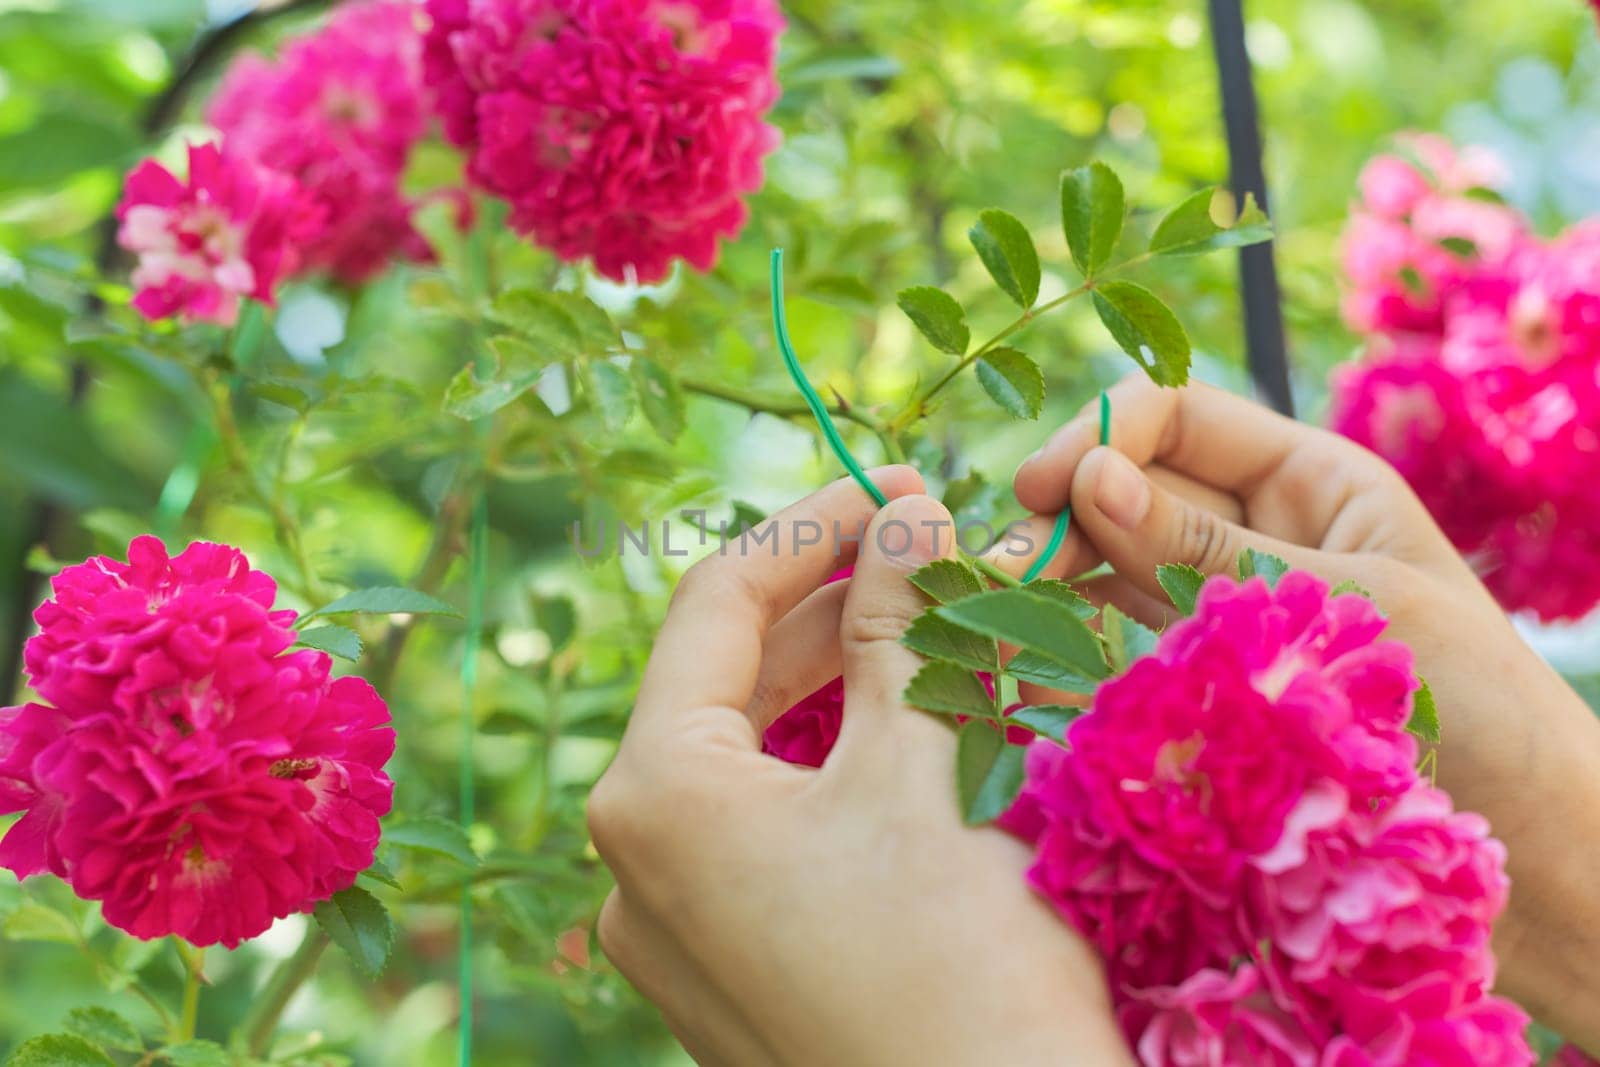 Hobbies of young woman growing rose bushes in garden, hands tying branches with weaving rose flowers on fence support